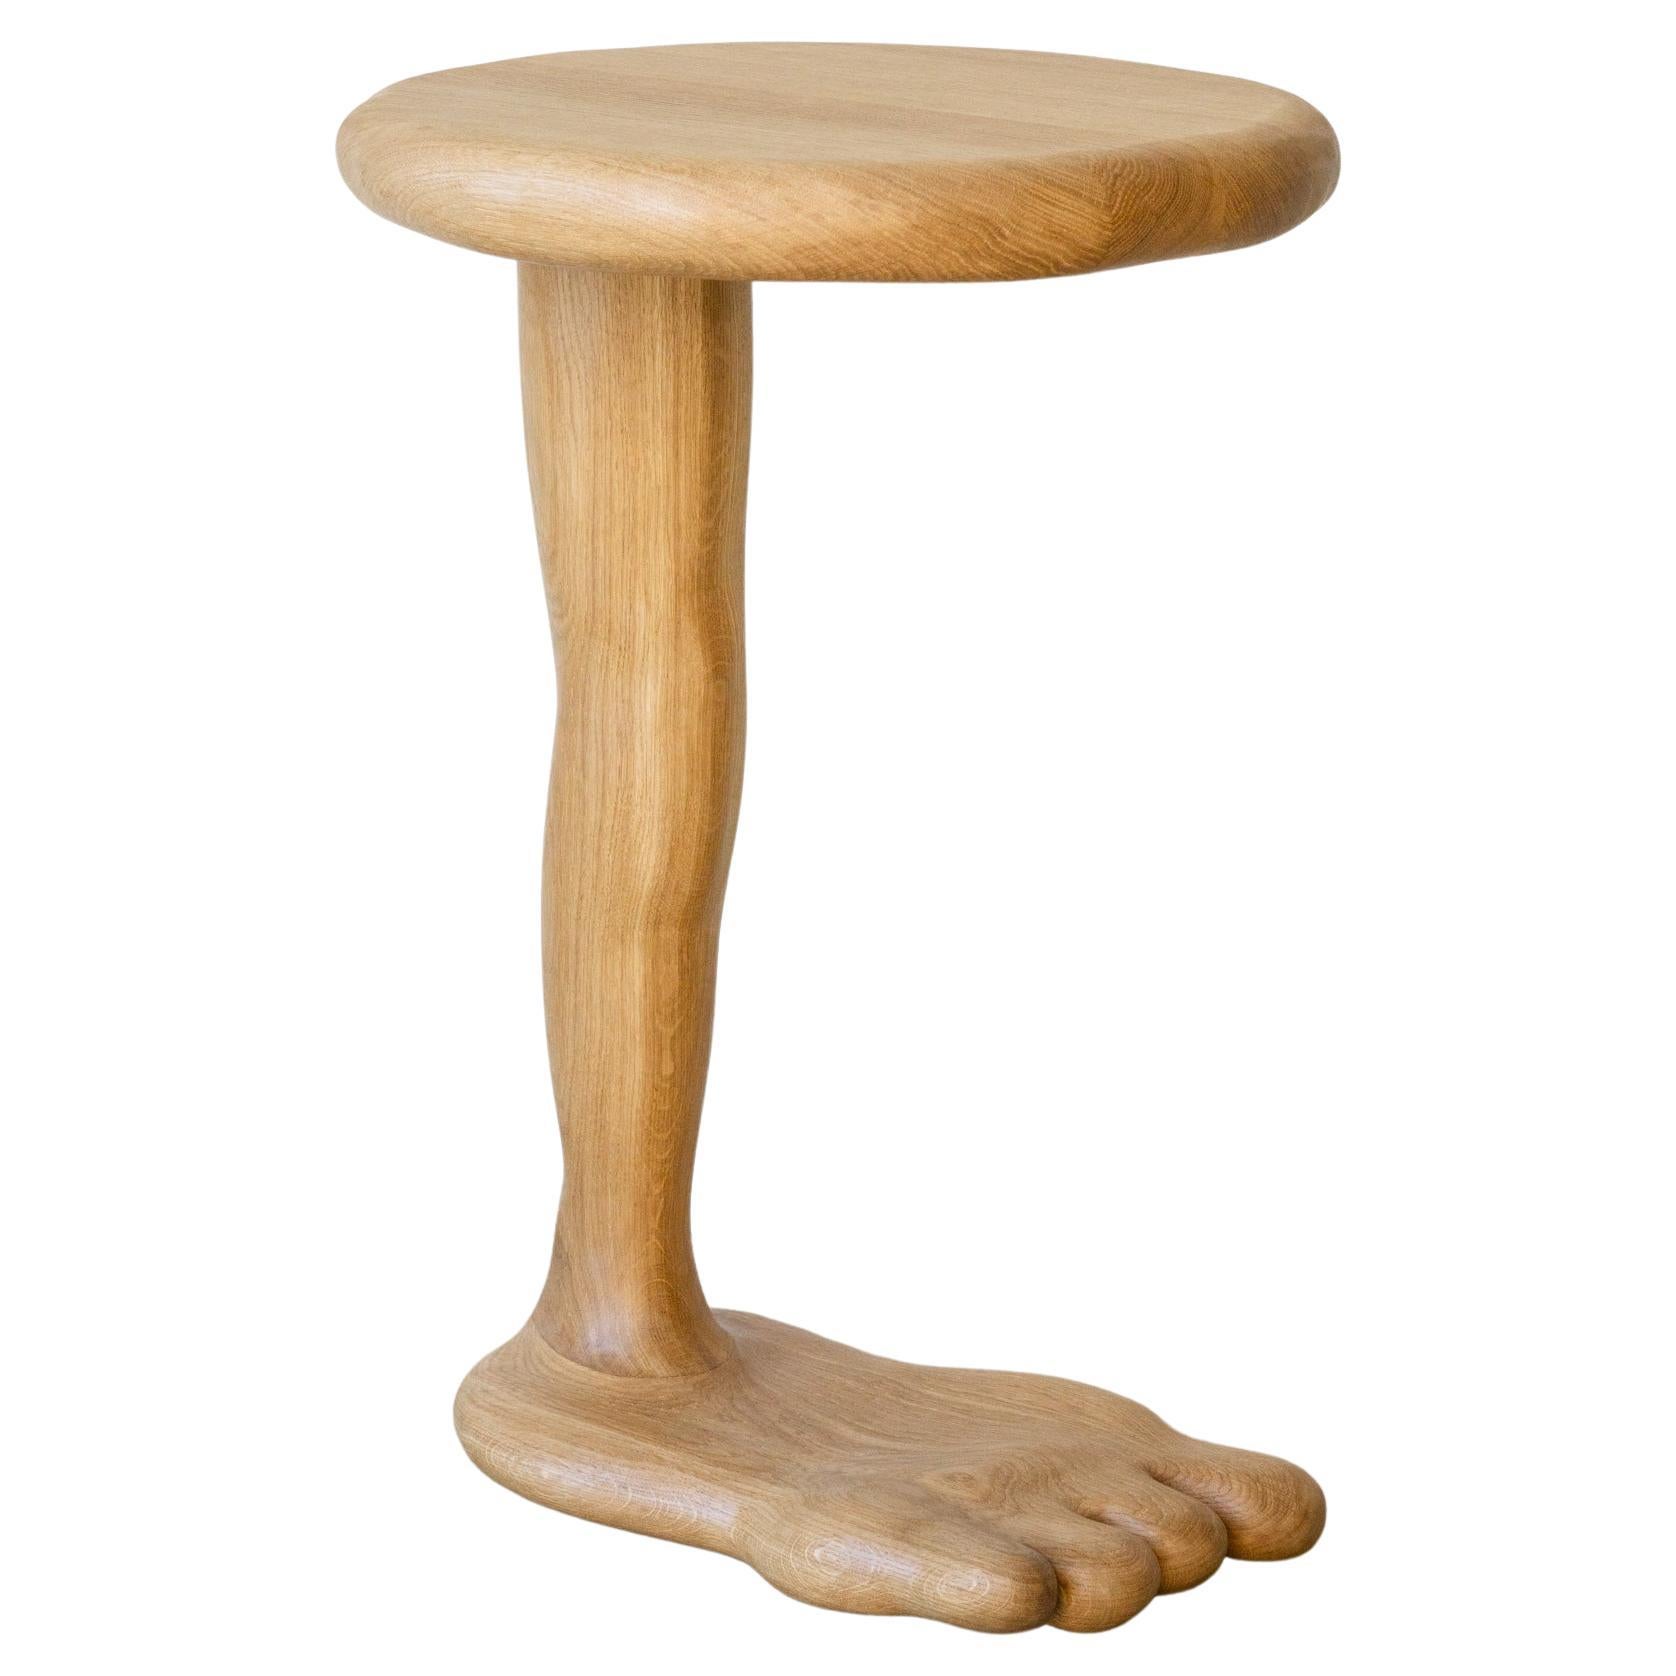 The Leg Side Table - Sculptural Table in Oak Wood For Sale